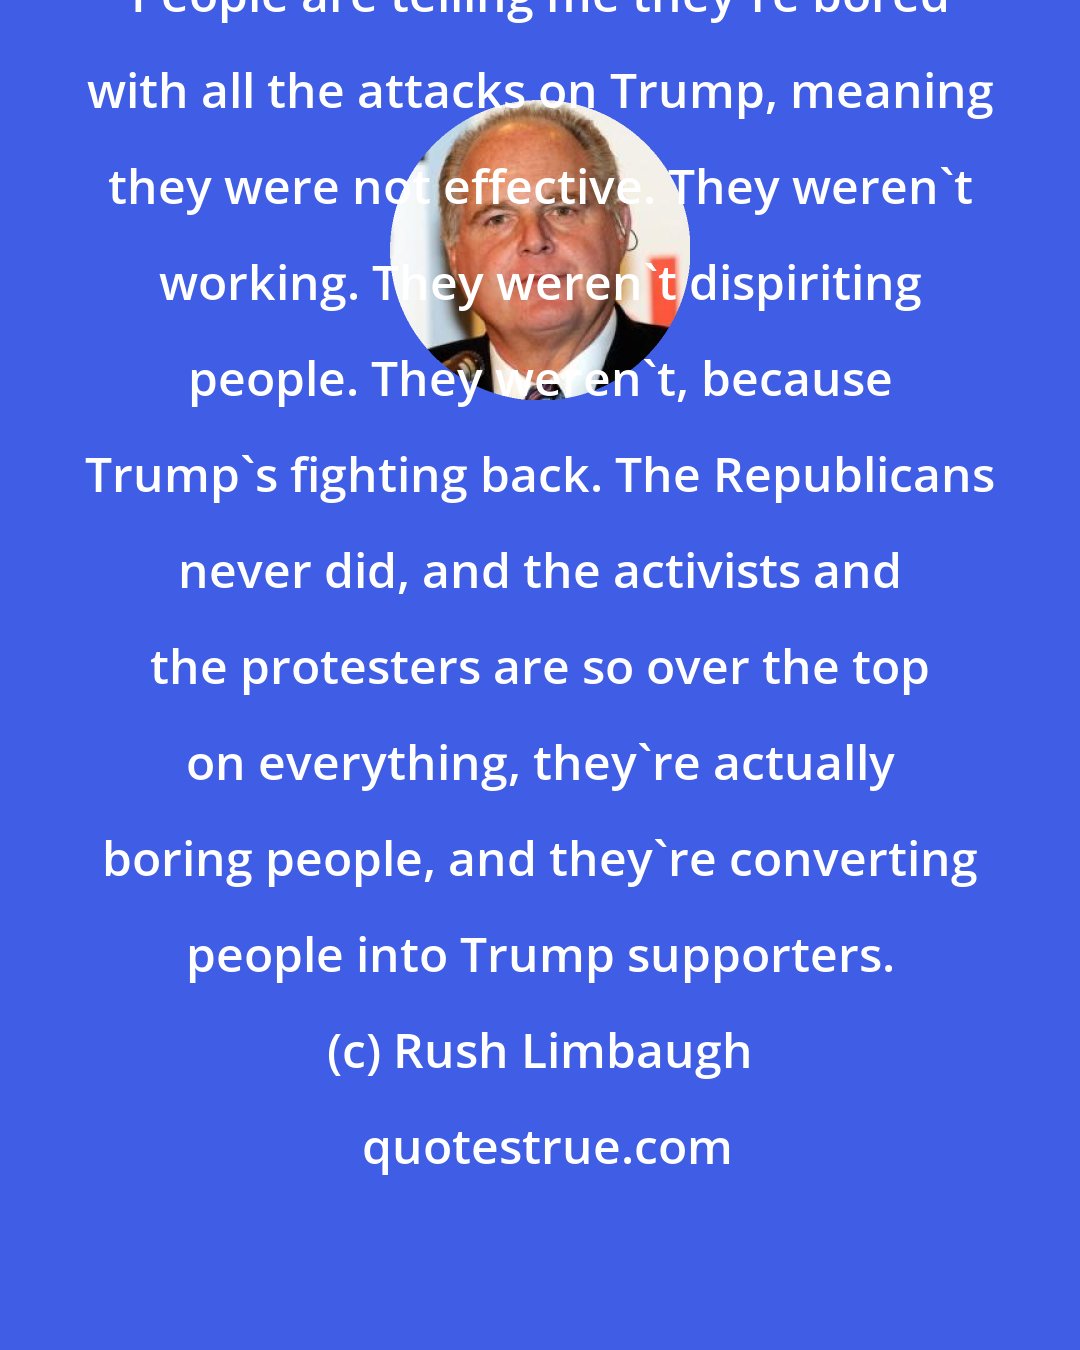 Rush Limbaugh: People are telling me they're bored with all the attacks on Trump, meaning they were not effective. They weren't working. They weren't dispiriting people. They weren't, because Trump's fighting back. The Republicans never did, and the activists and the protesters are so over the top on everything, they're actually boring people, and they're converting people into Trump supporters.